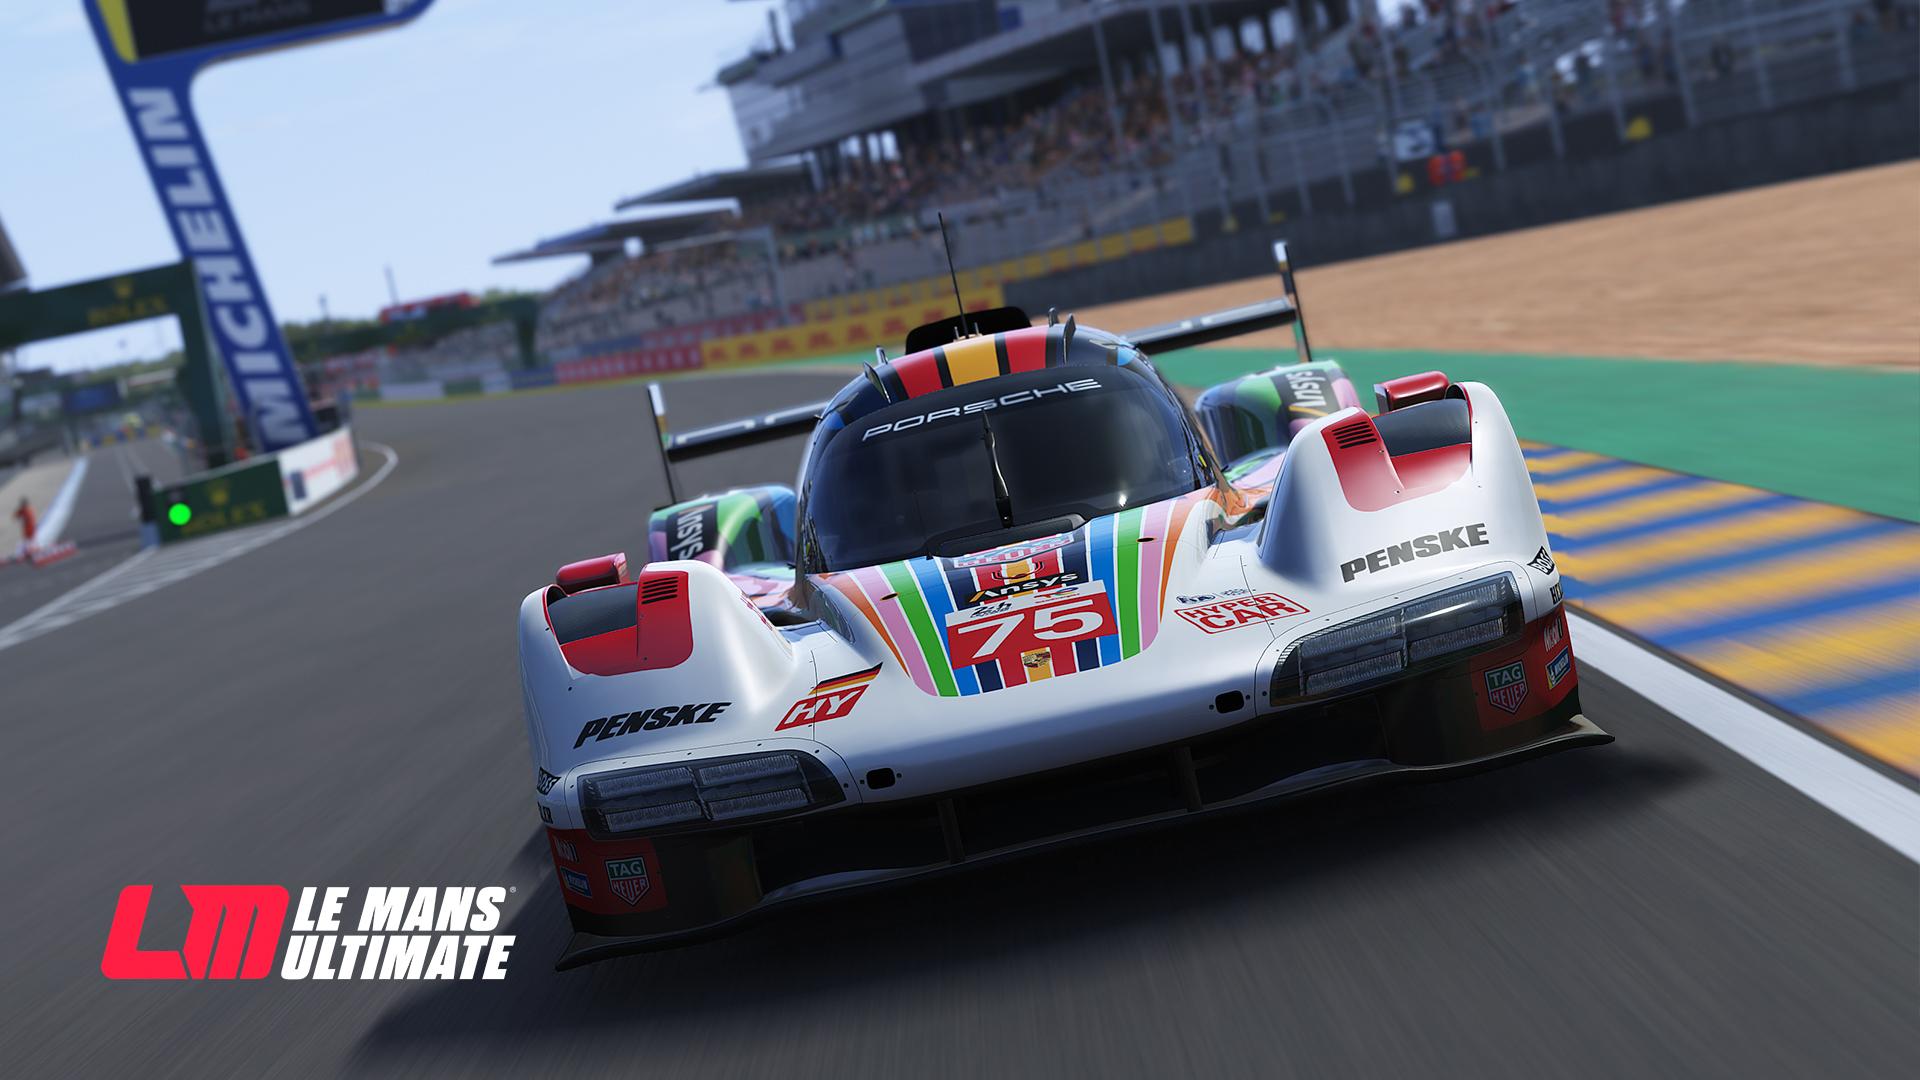 Le Mans Ultimate is the official game of the 24-hour race and WEC